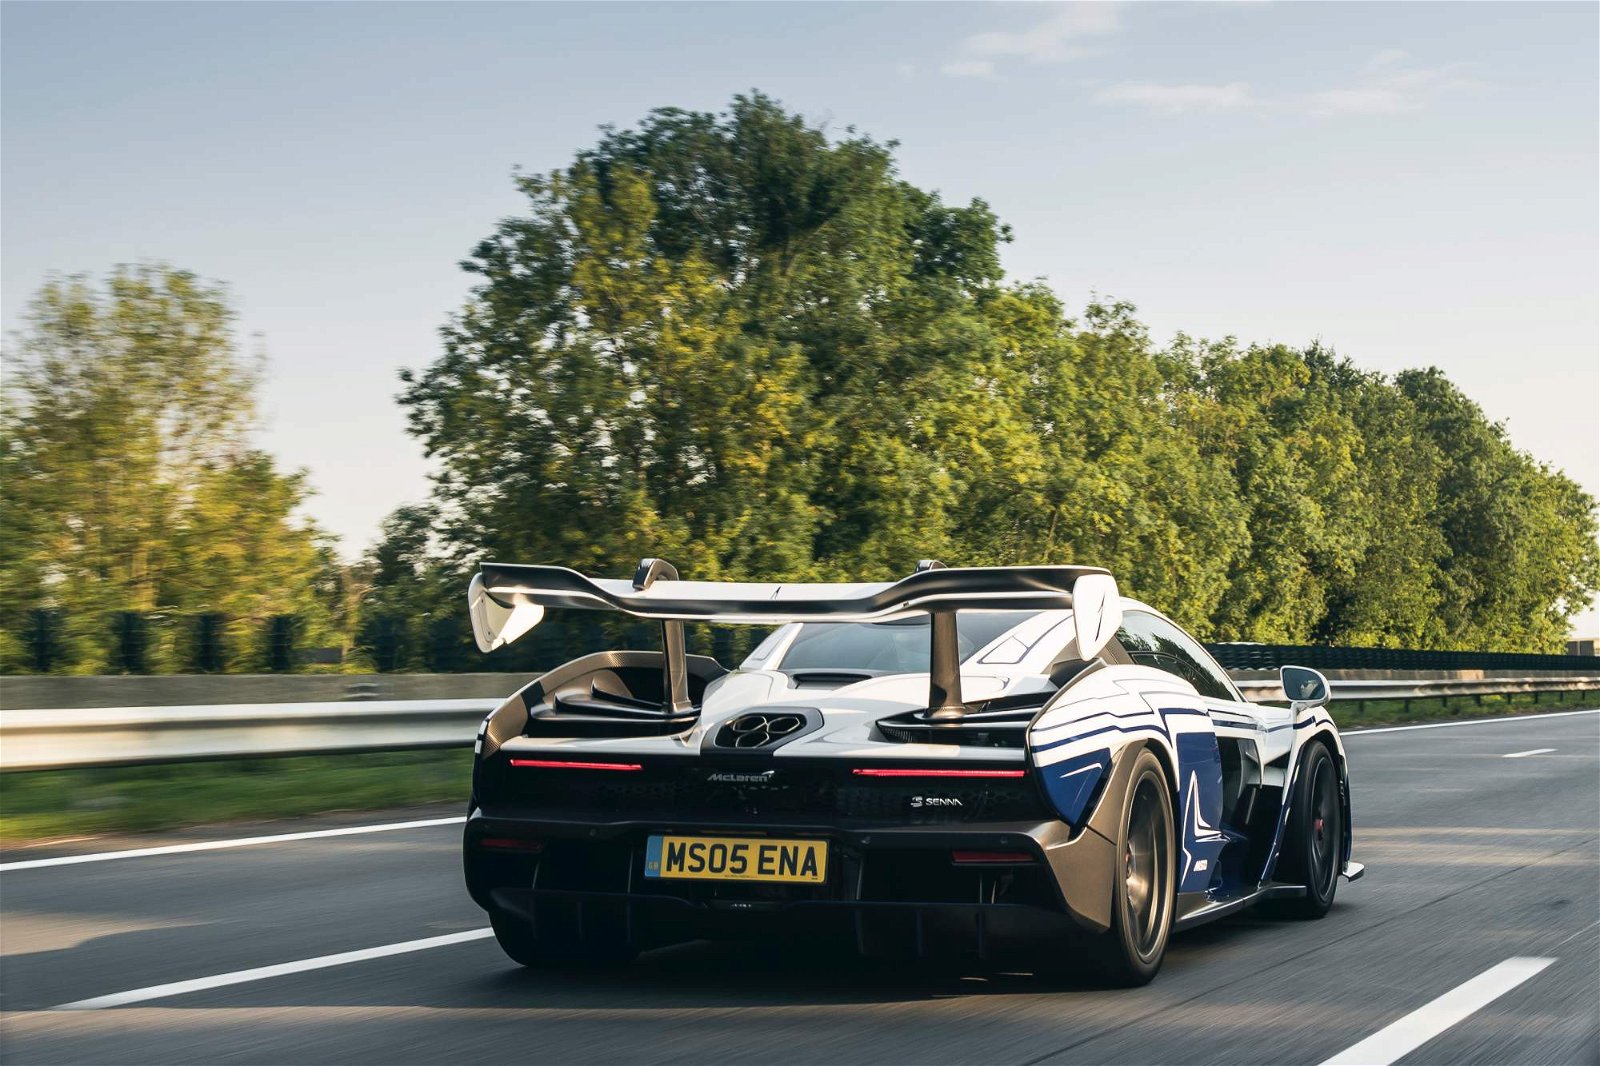 McLaren-Senna-chassis-001-on-maiden-road-trip-to-Paul-Ricard-circuit-4